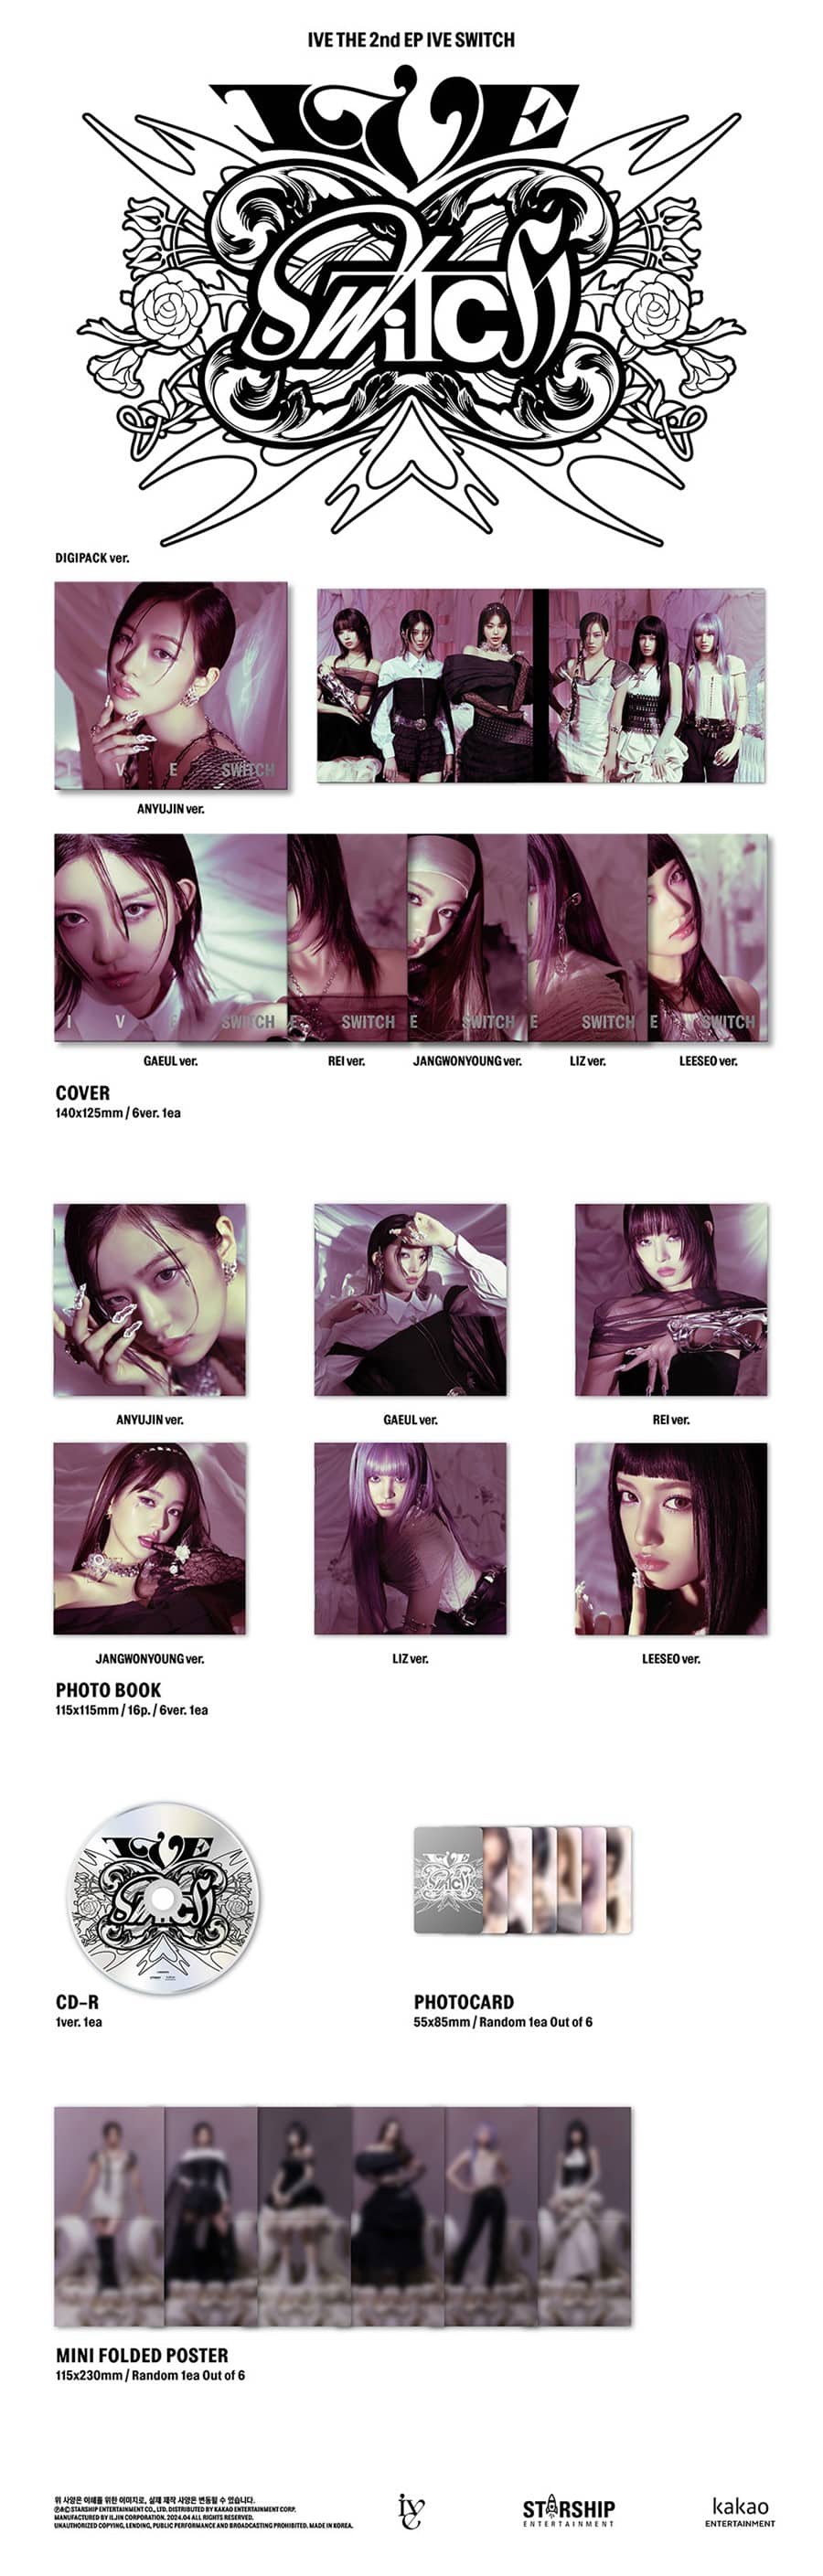 ive-2nd-ep-ive-switch-digipack-ver-limited-wholesales